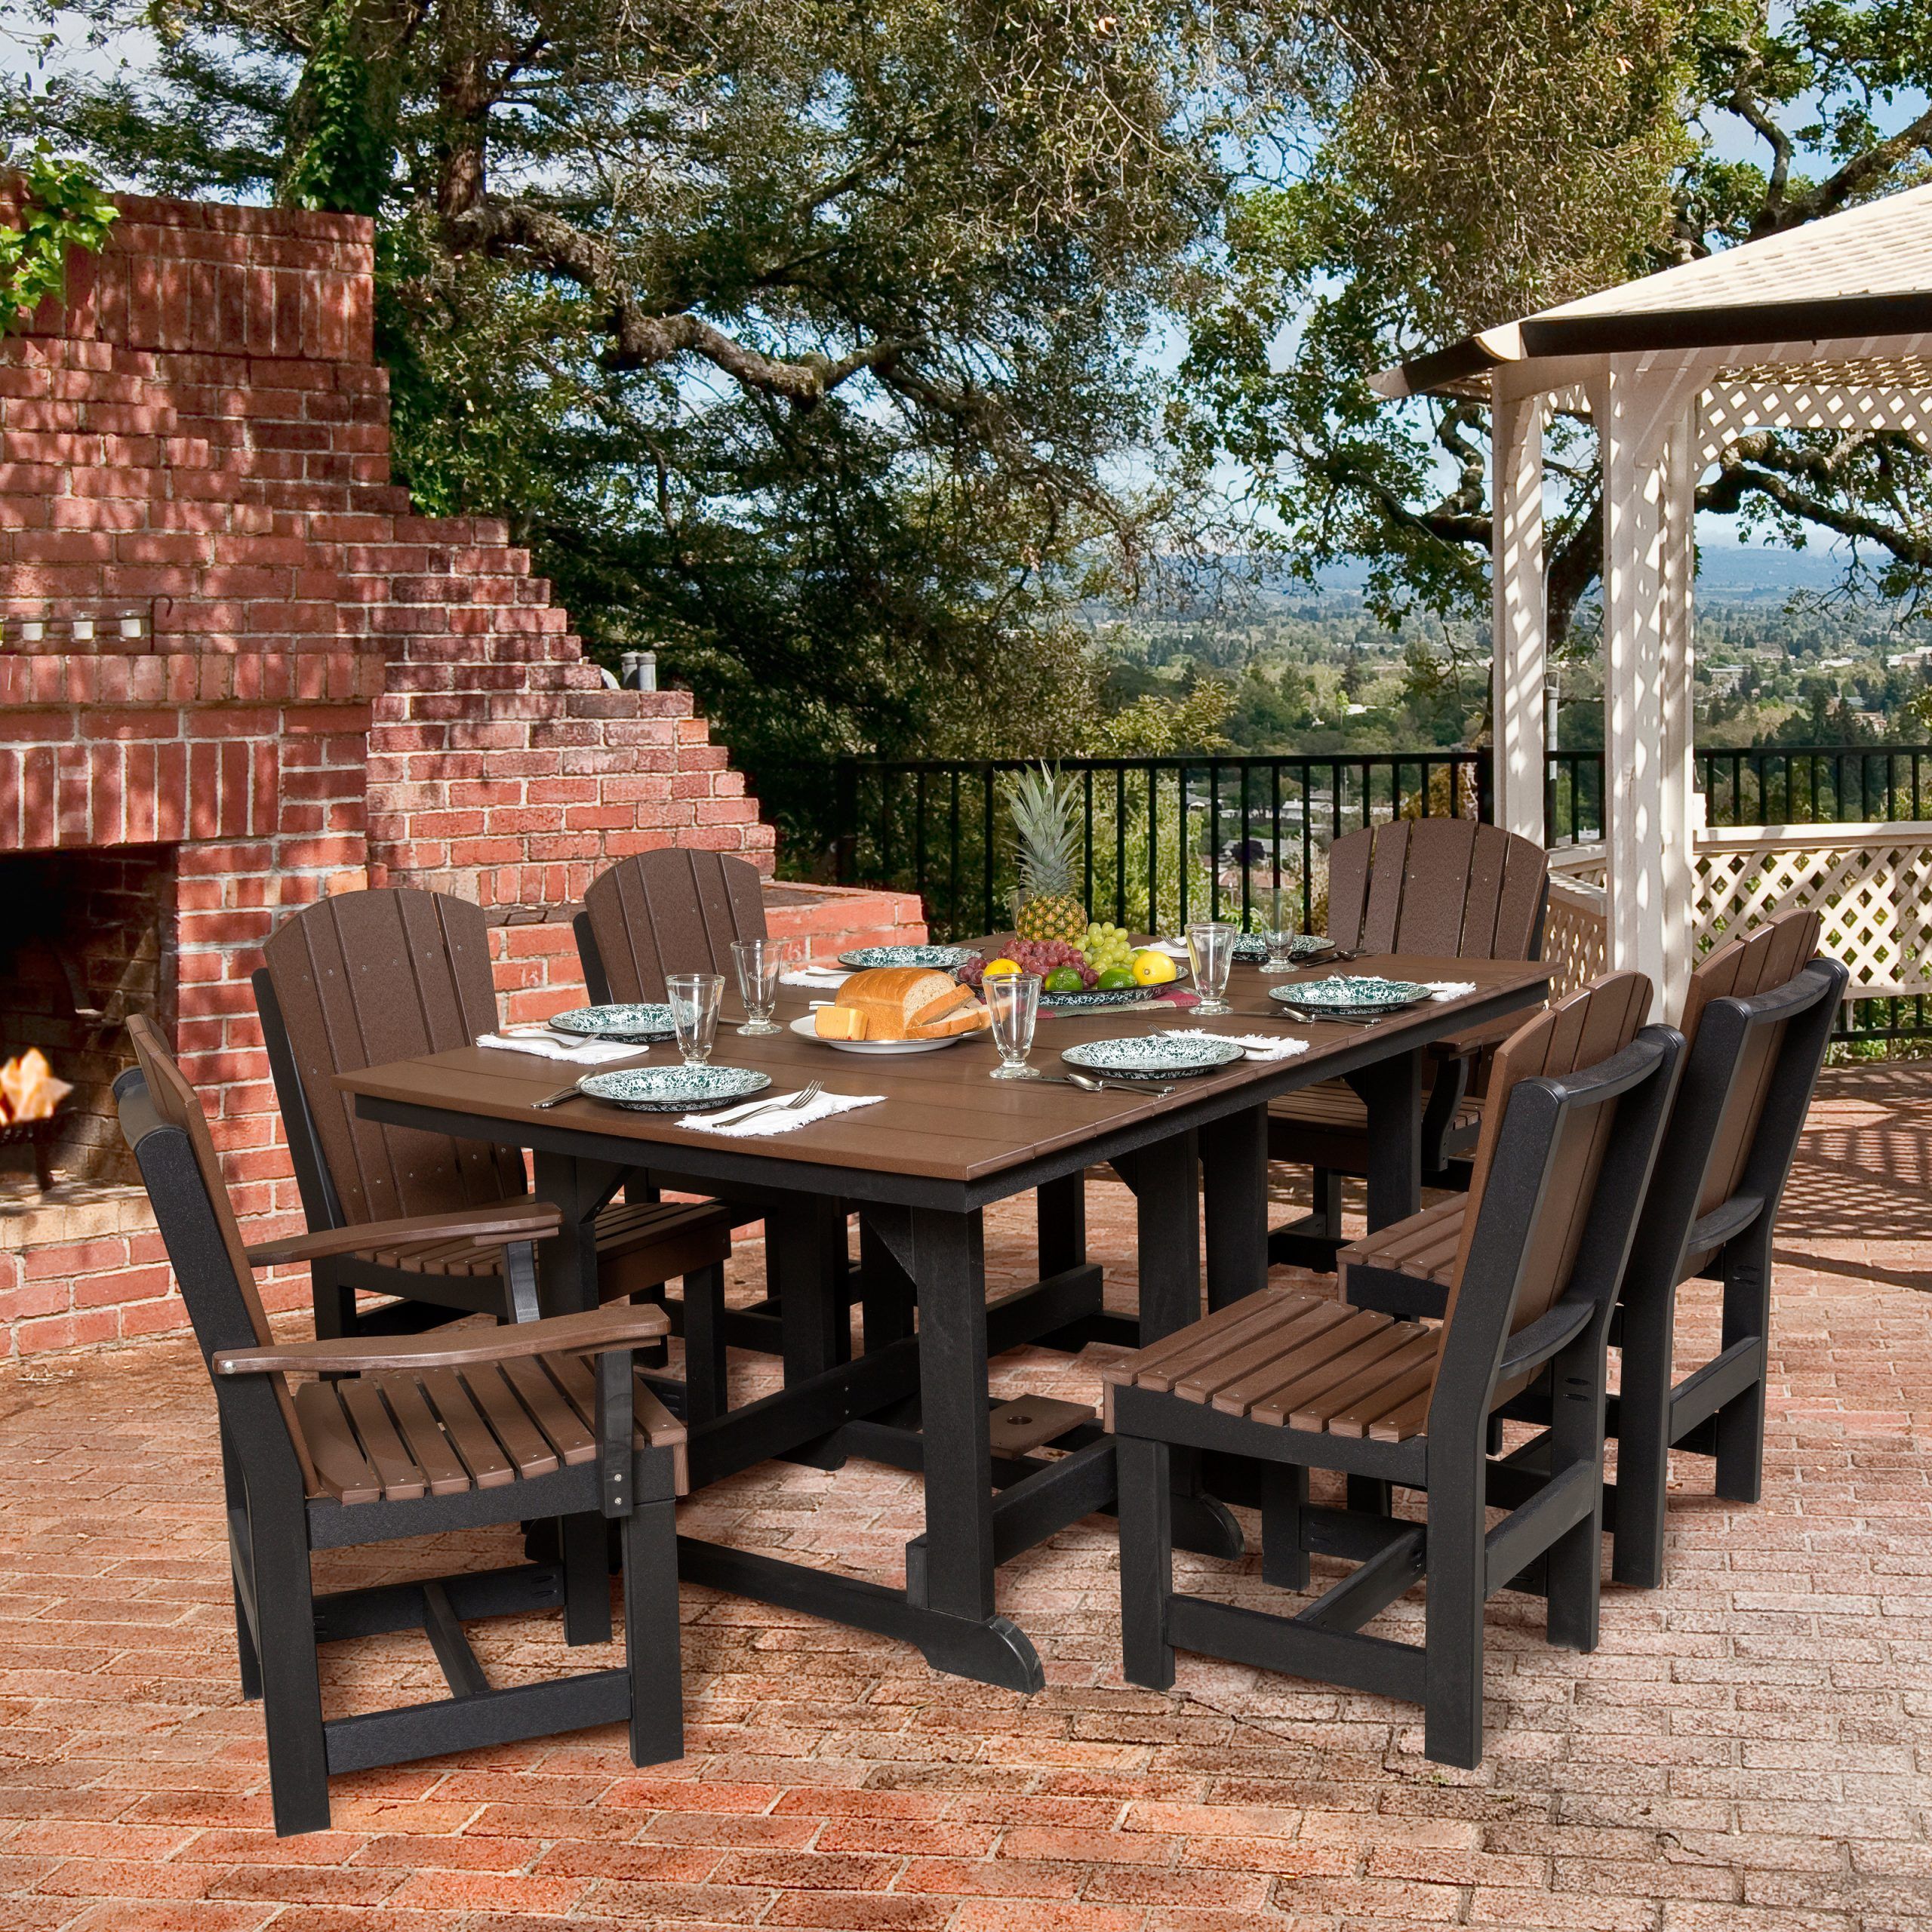 7 Piece Rectangular Patio Dining Sets With Latest Little Cottage Heritage Recycled Plastic 7 Piece Rectangular Patio (View 5 of 15)